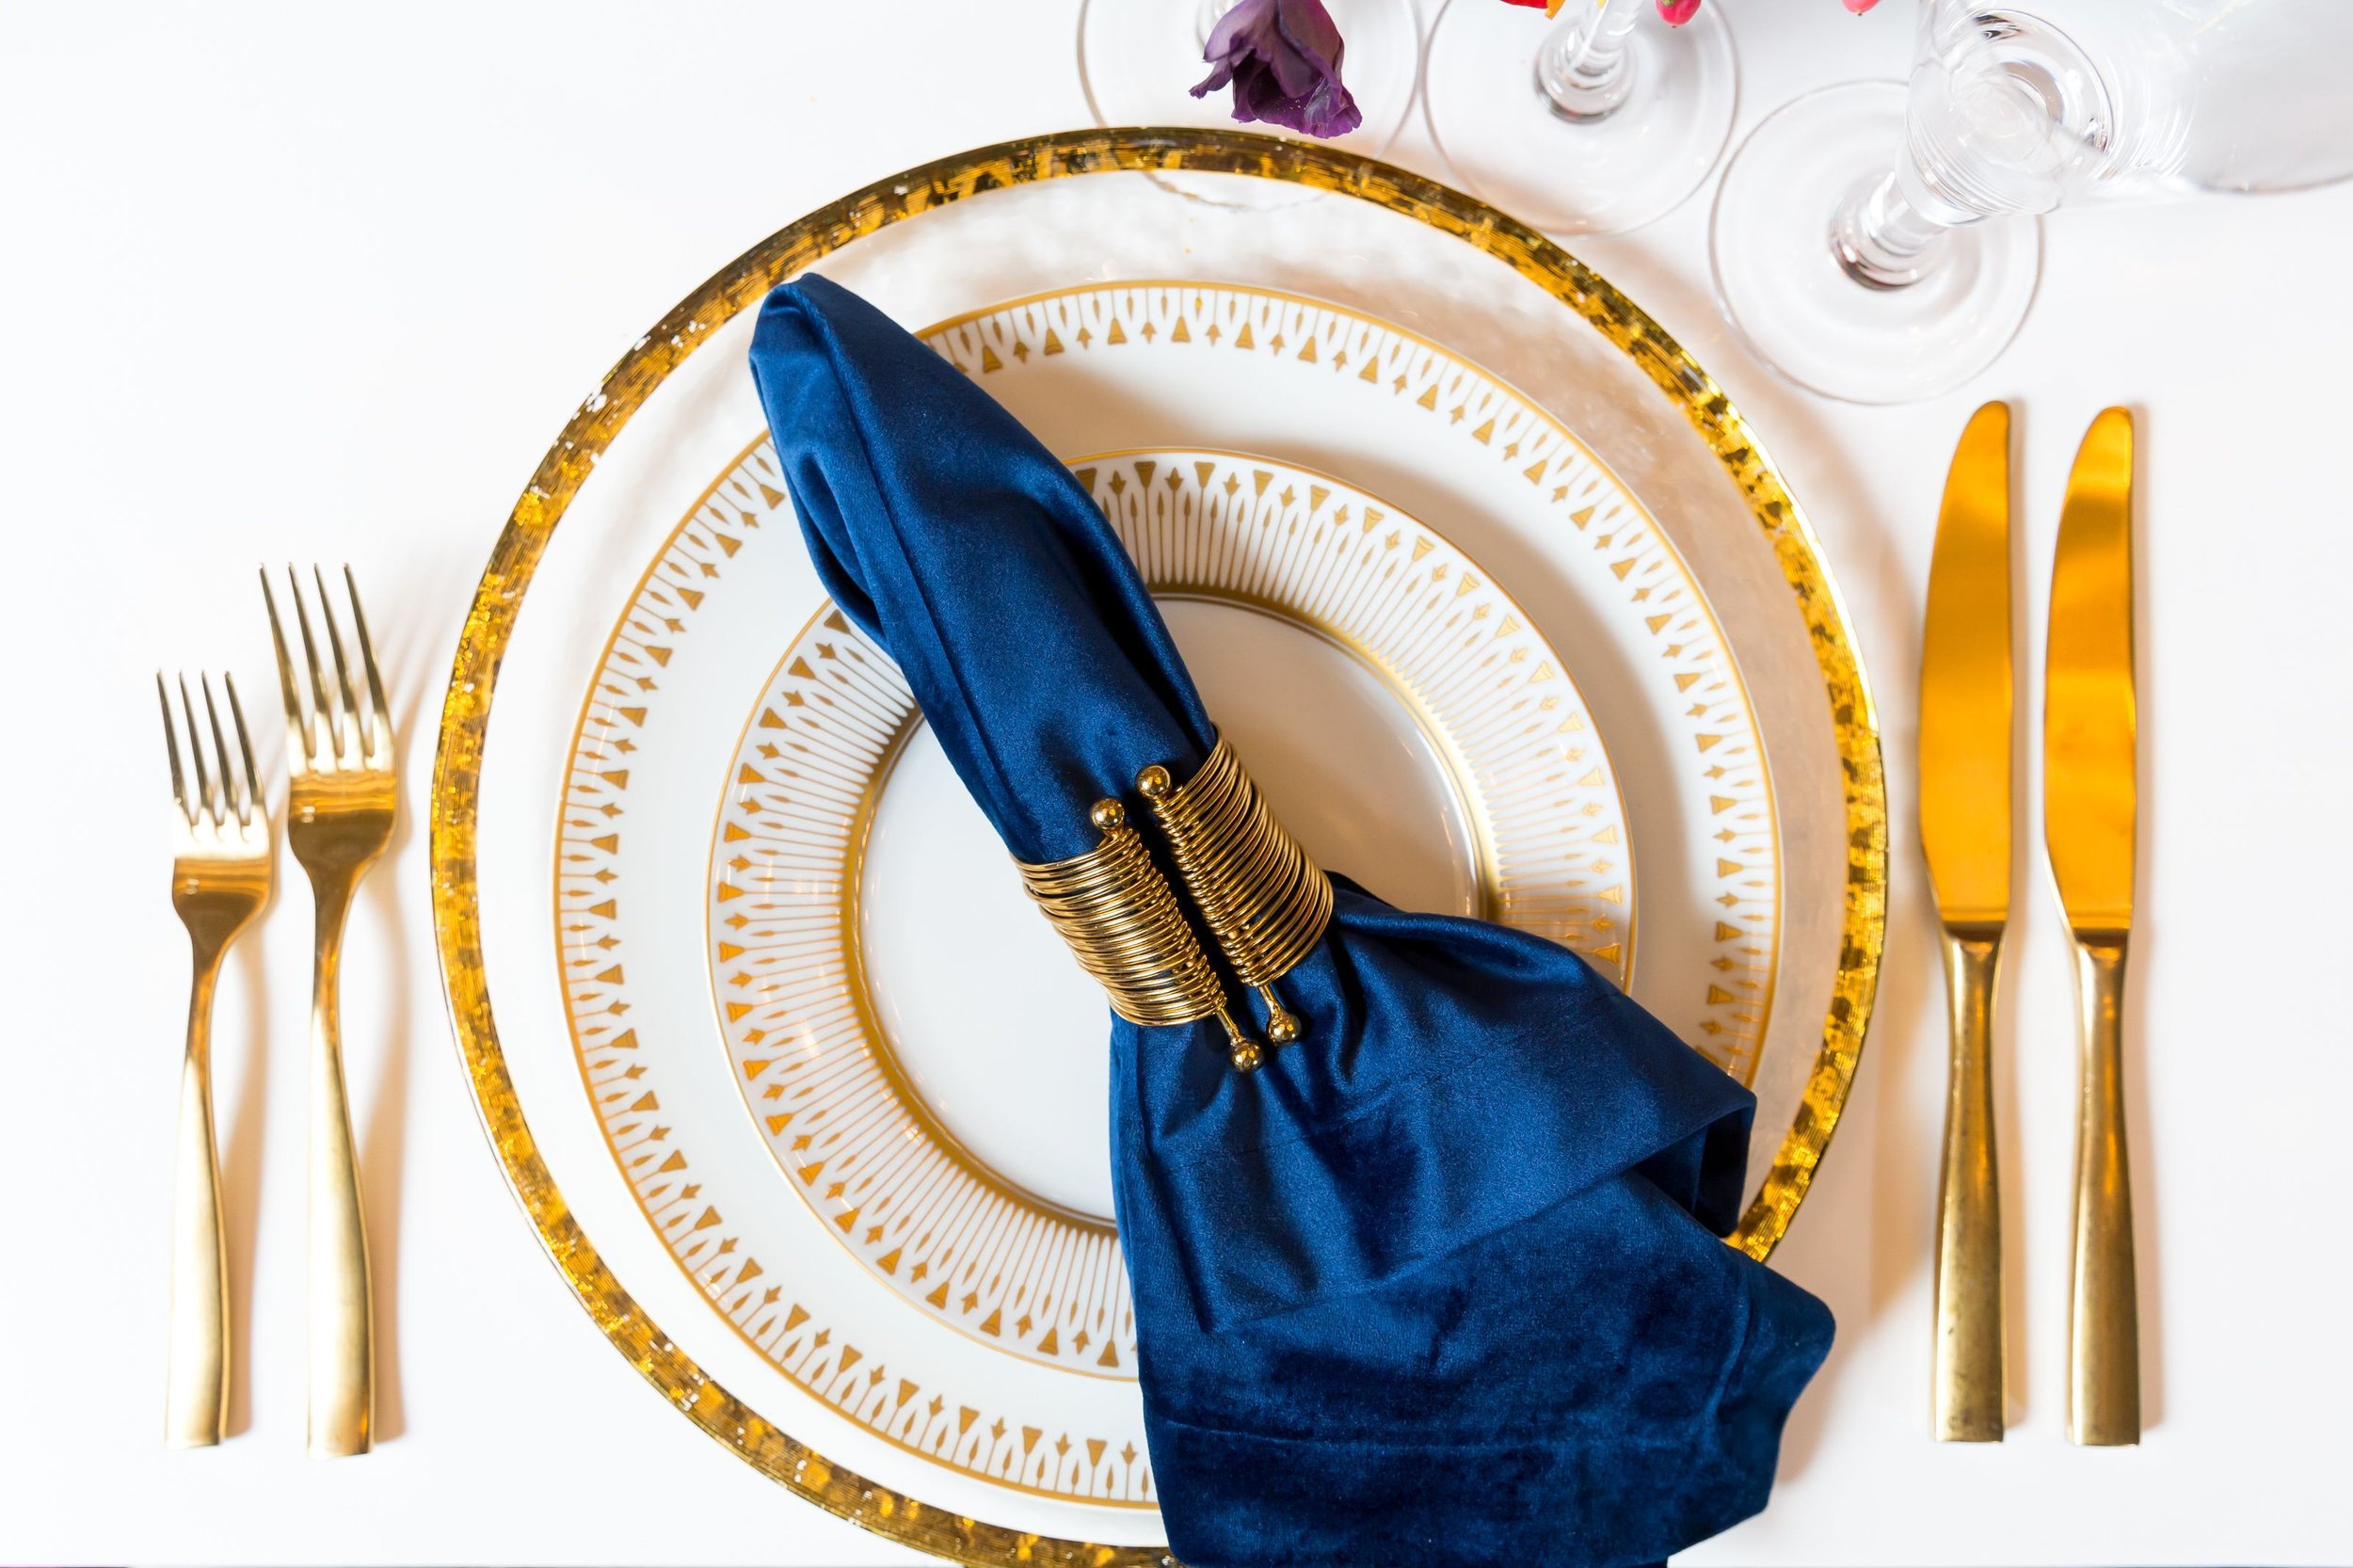 www.santabarbarawedding.com | Bright Event Rentals | Vanity Portrait Studio | Place Setting with Gold Rimmed Plates and Charger, Gold Silverware, and a Blue Napkin